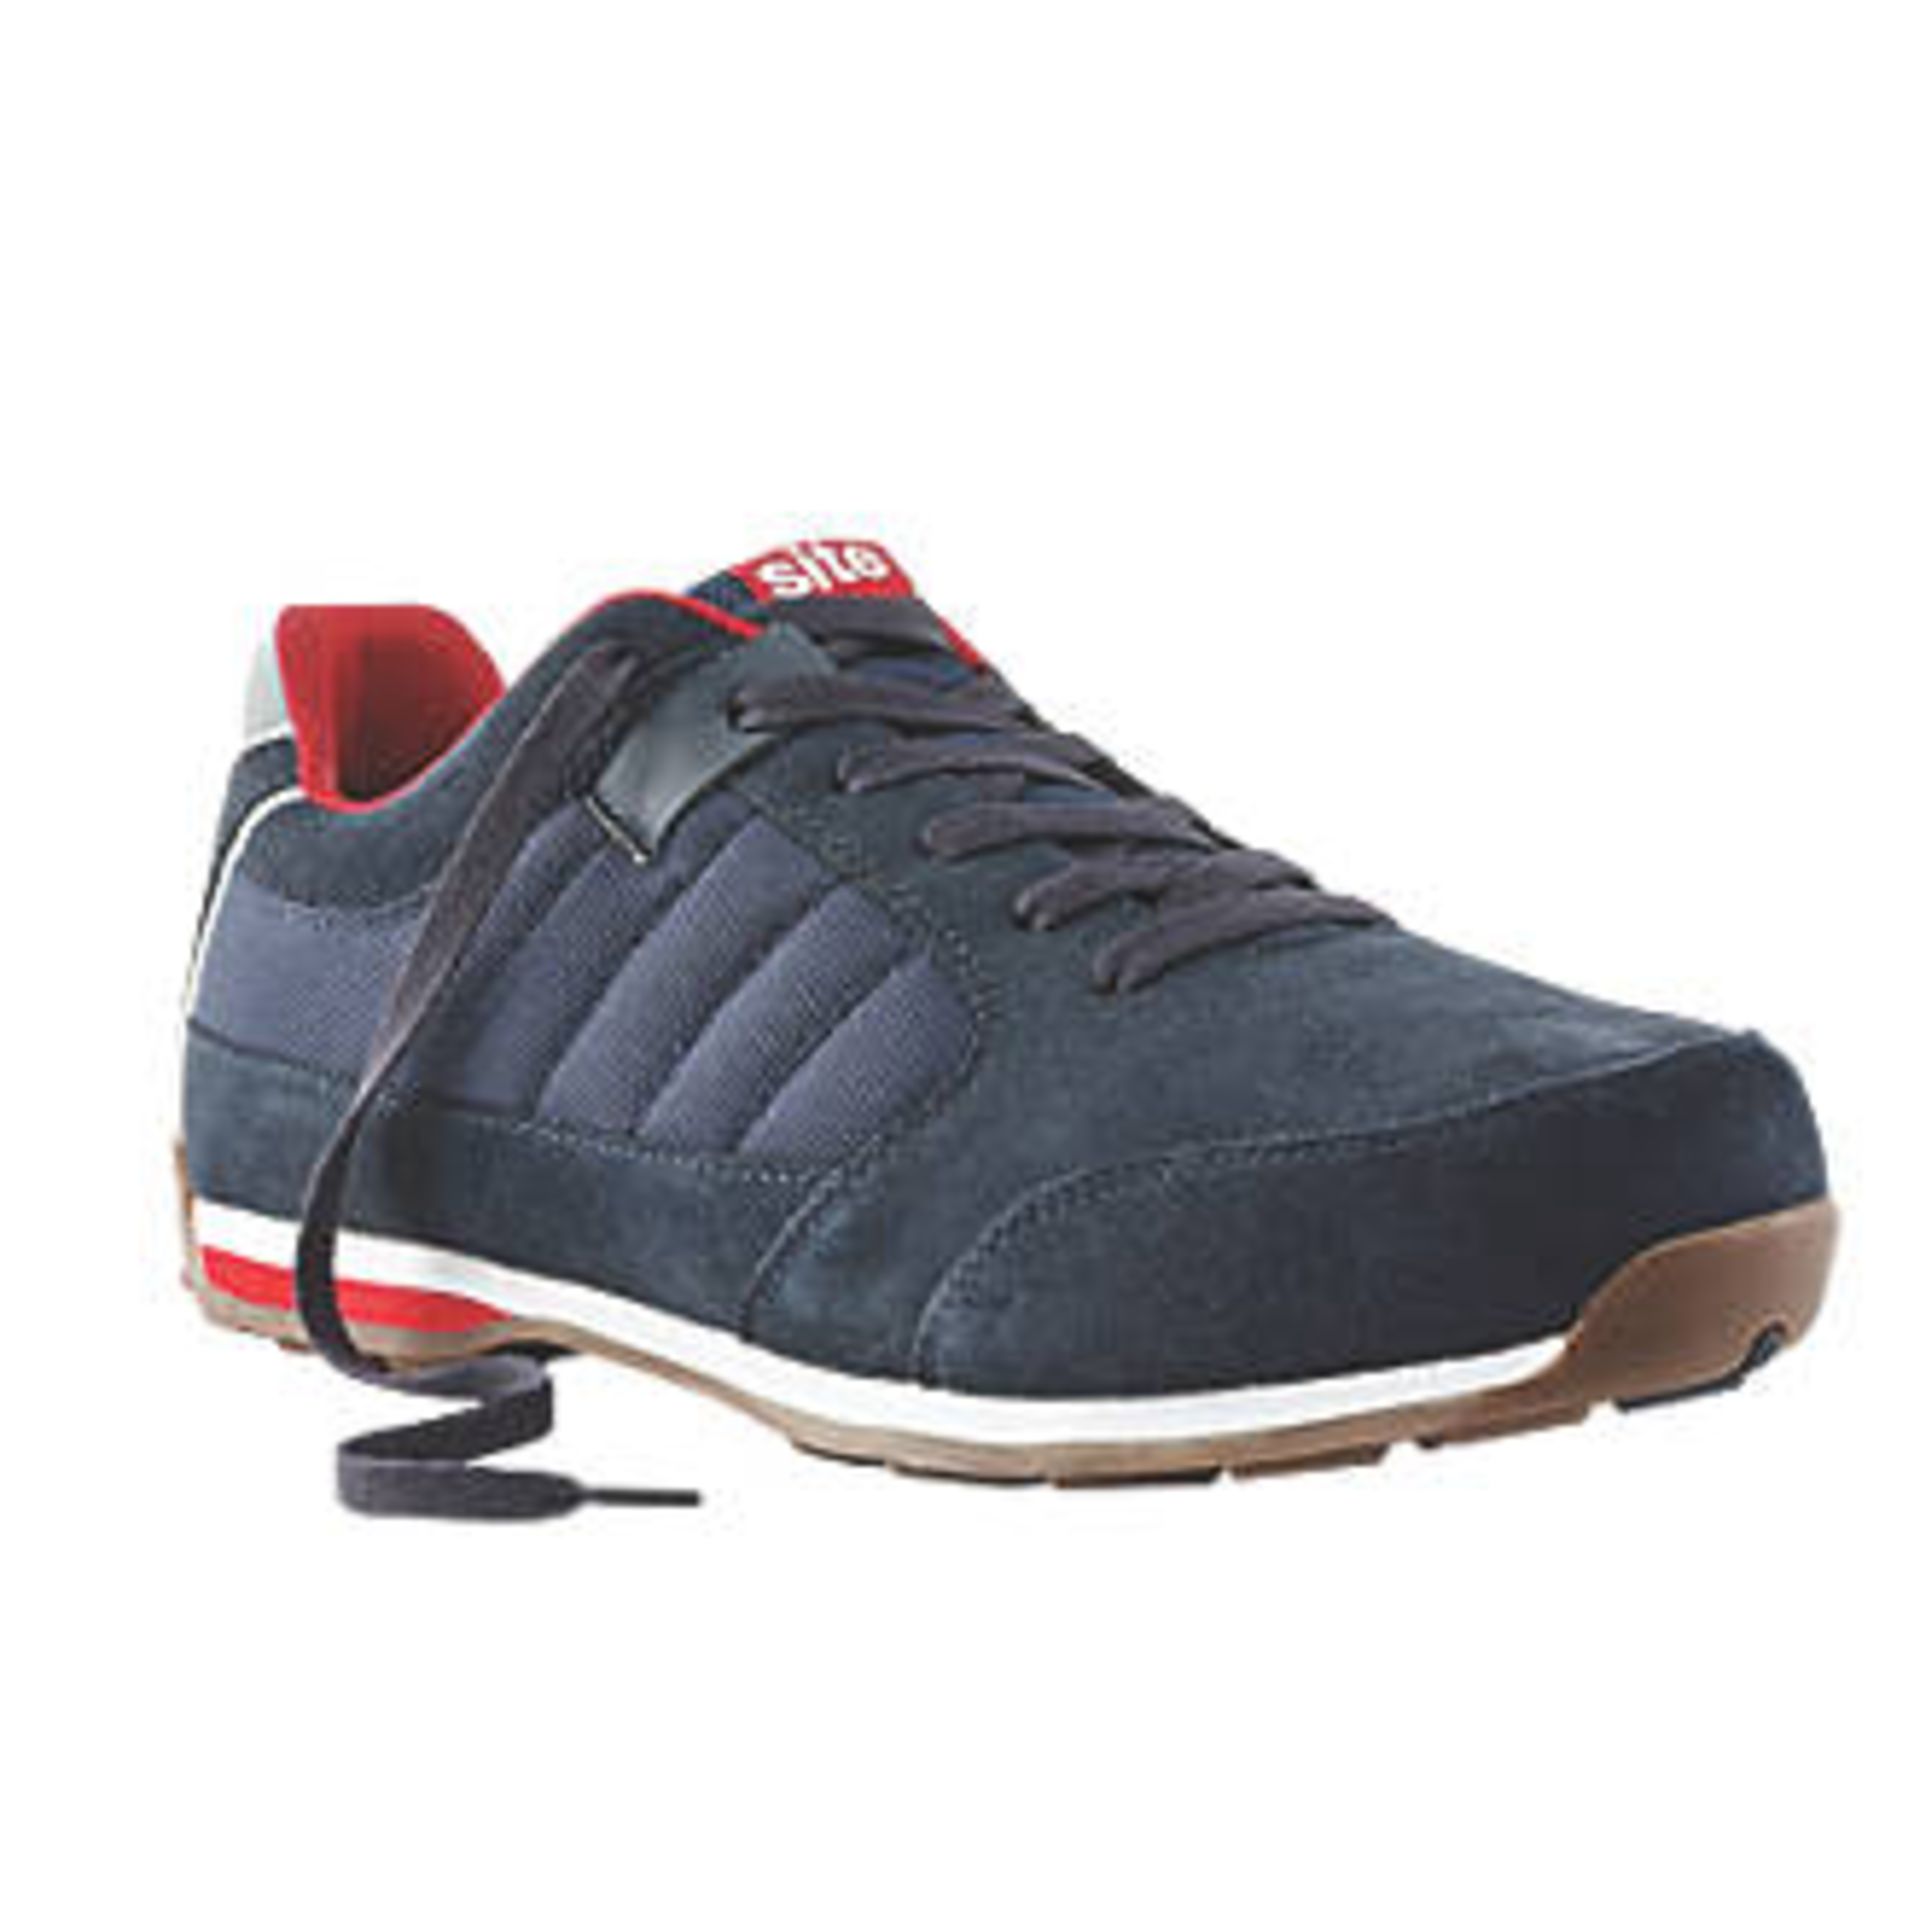 4 X NEW BOXED PAIRS OF STRETA SAFETY TRAINERS NAVY. SIZE 9. (ROW12) Suede leather and mesh upper.